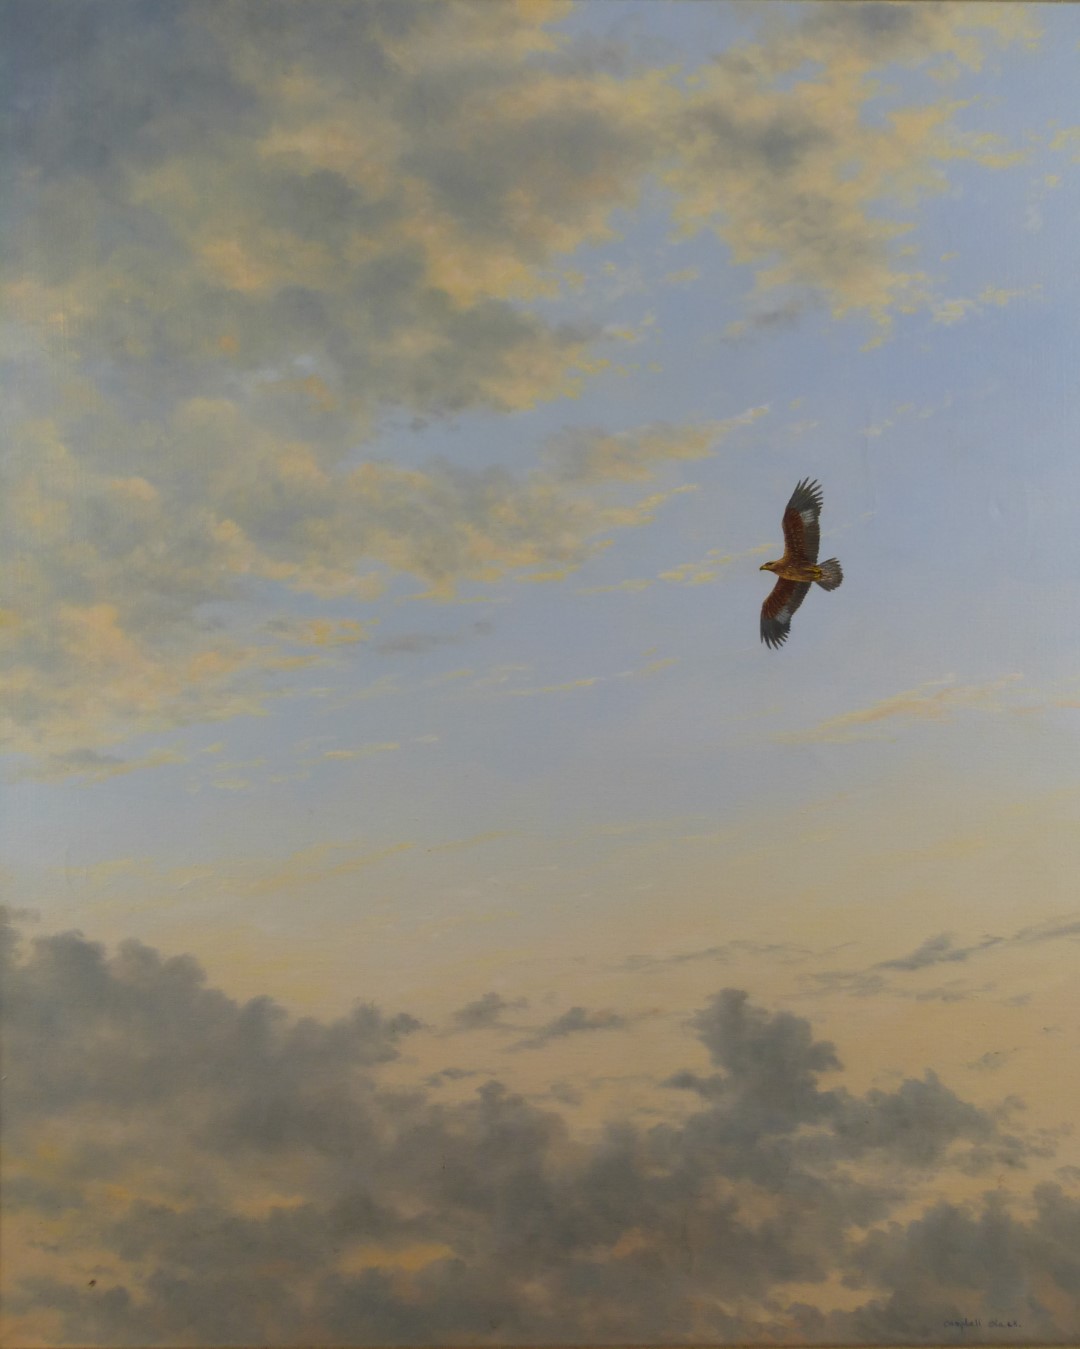 Geoffrey Campbell-Black (b1925) oil on canvas of Golden Eagle soaring in a cloudy sky, signed